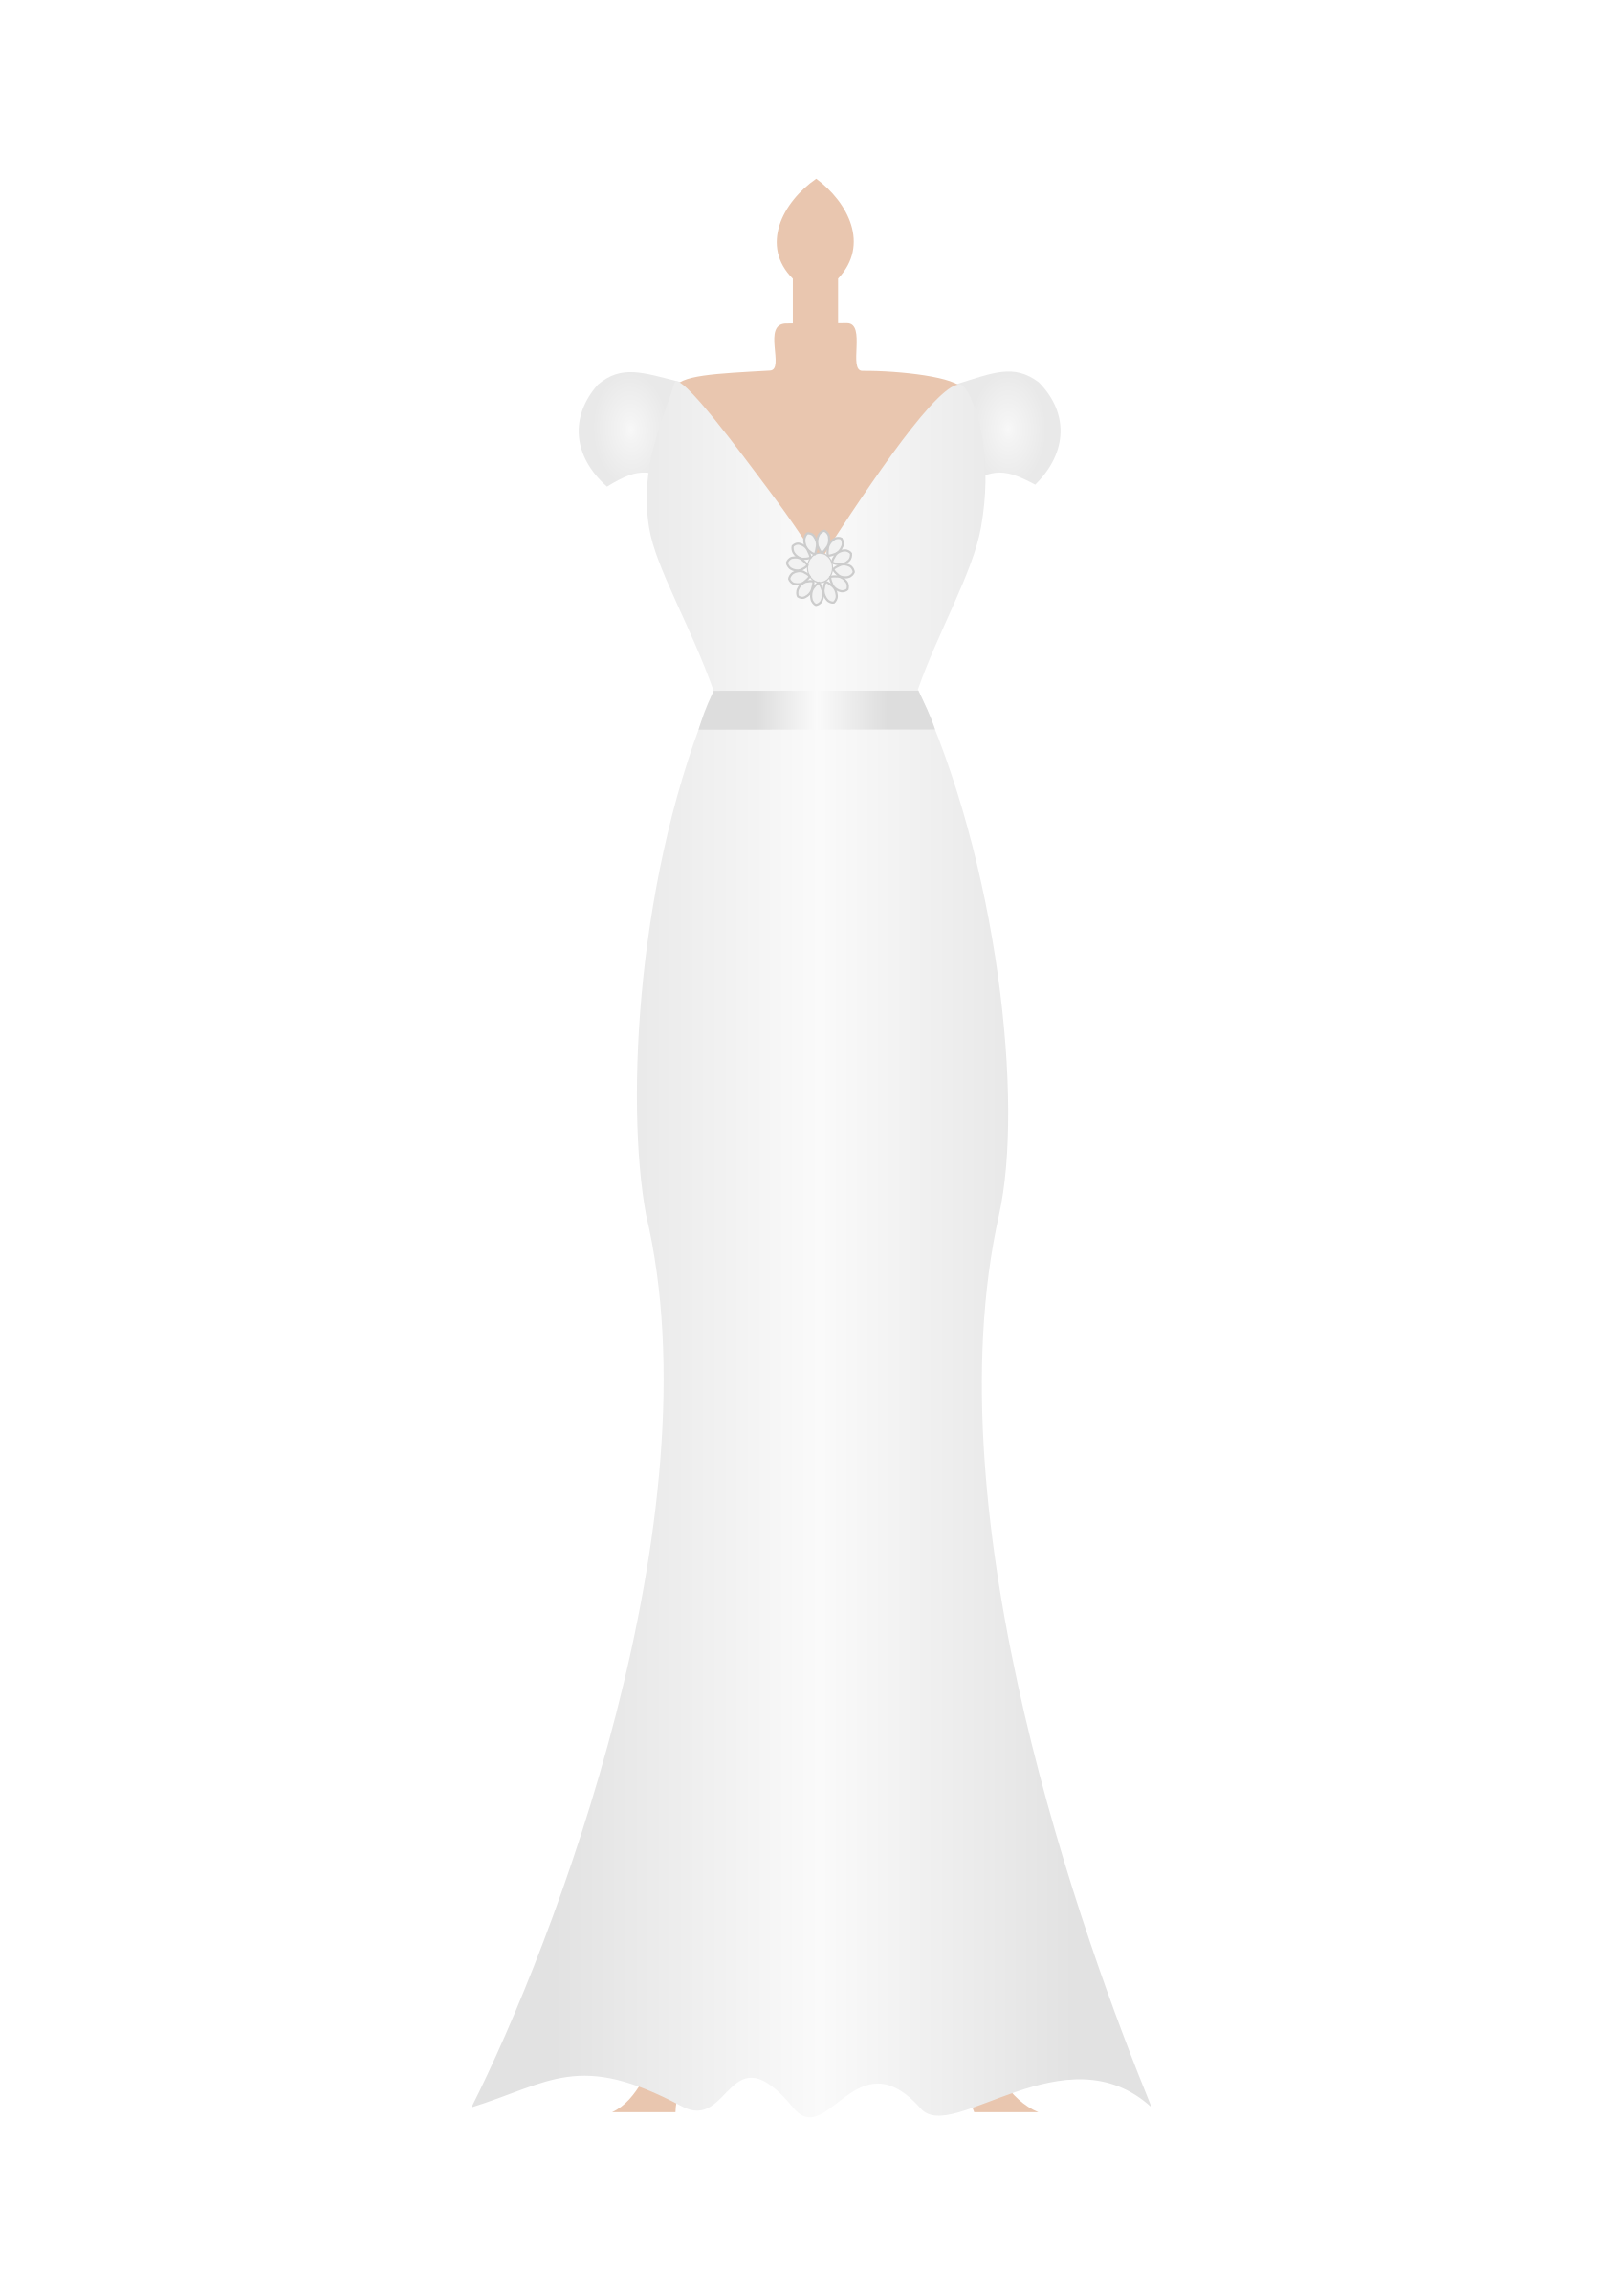 Wedding Dress clipart #18, Download drawings